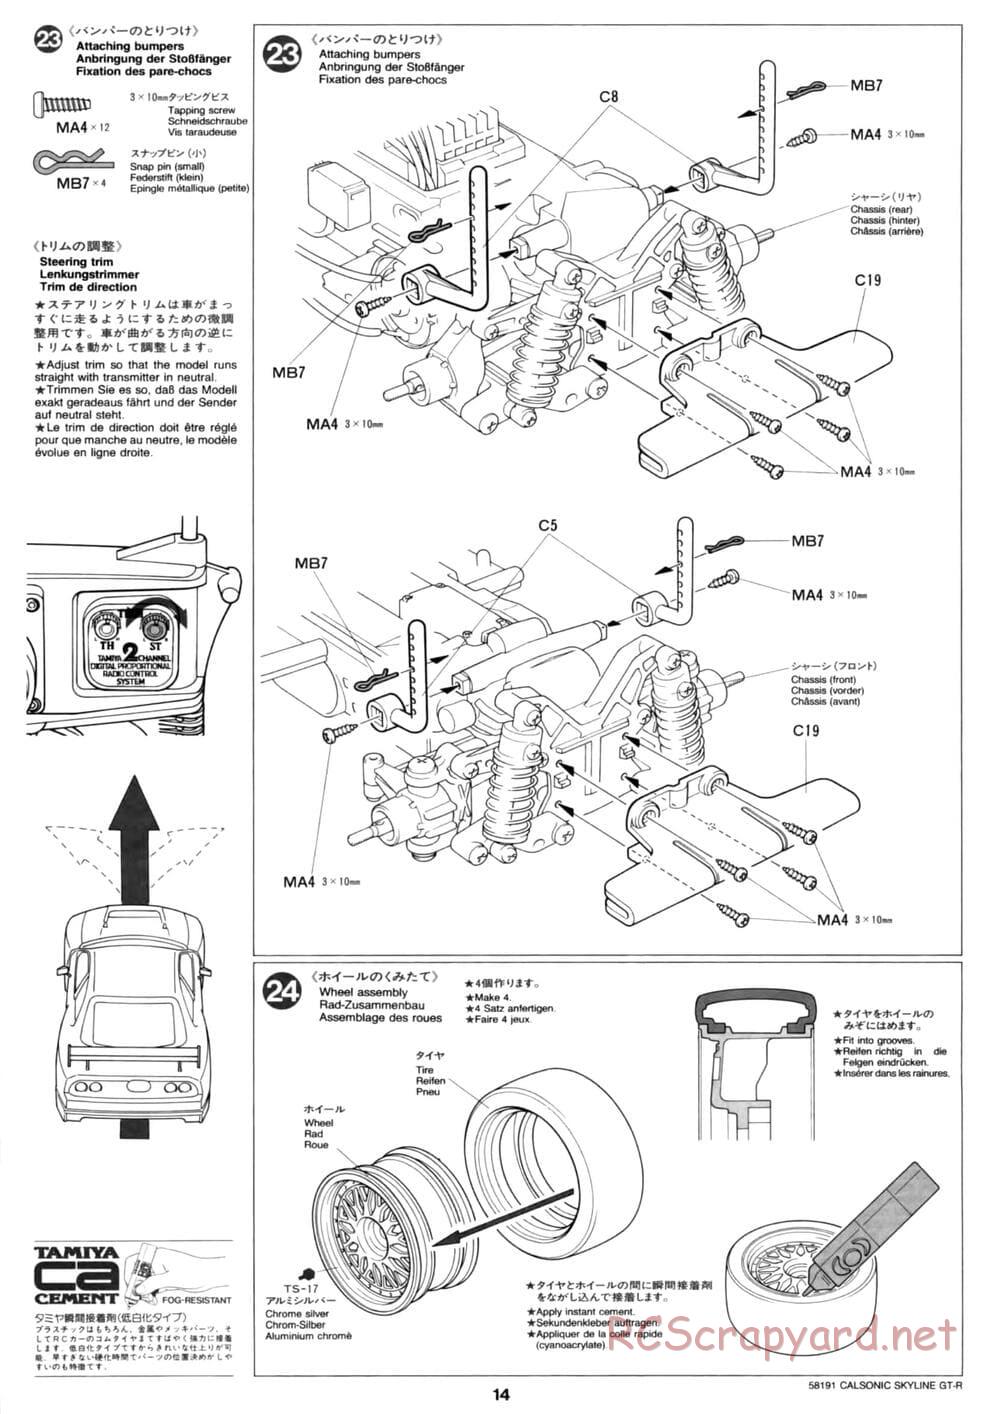 Tamiya - Calsonic Skyline GT-R - TL-01 Chassis - Manual - Page 14